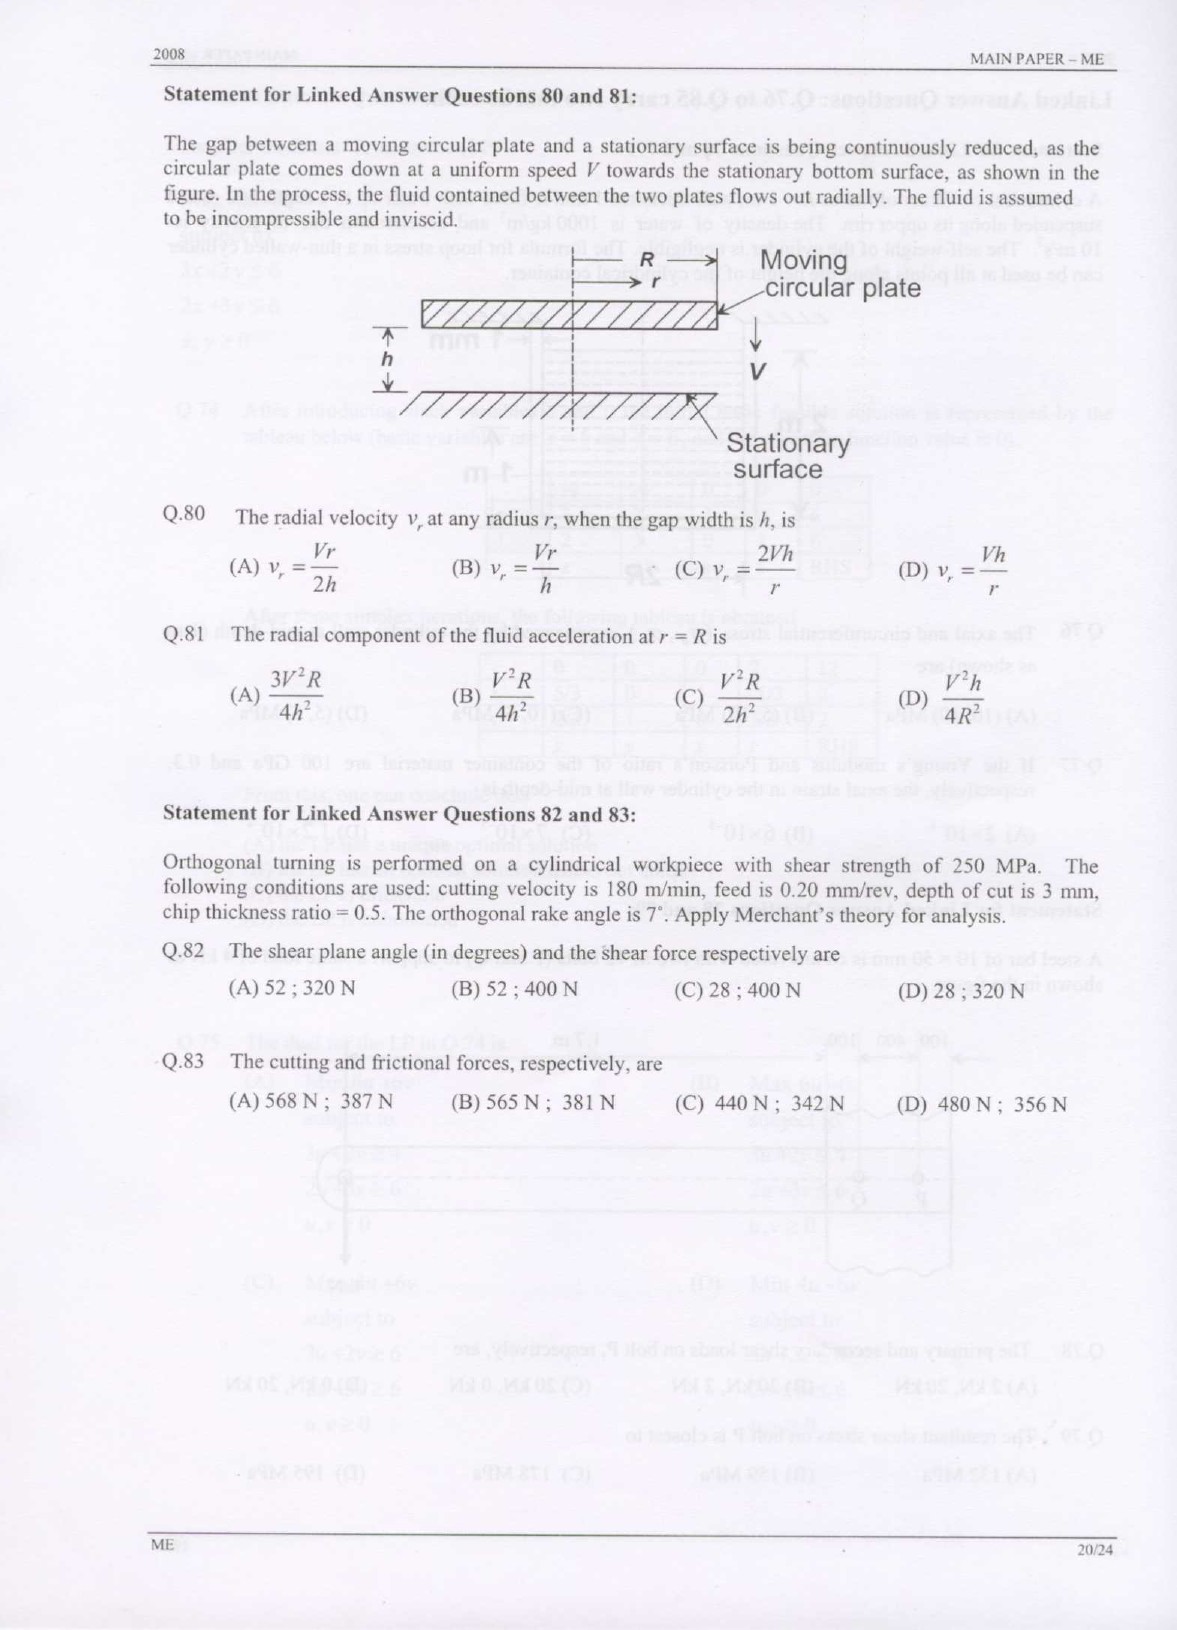 GATE Exam Question Paper 2008 Mechanical Engineering 20